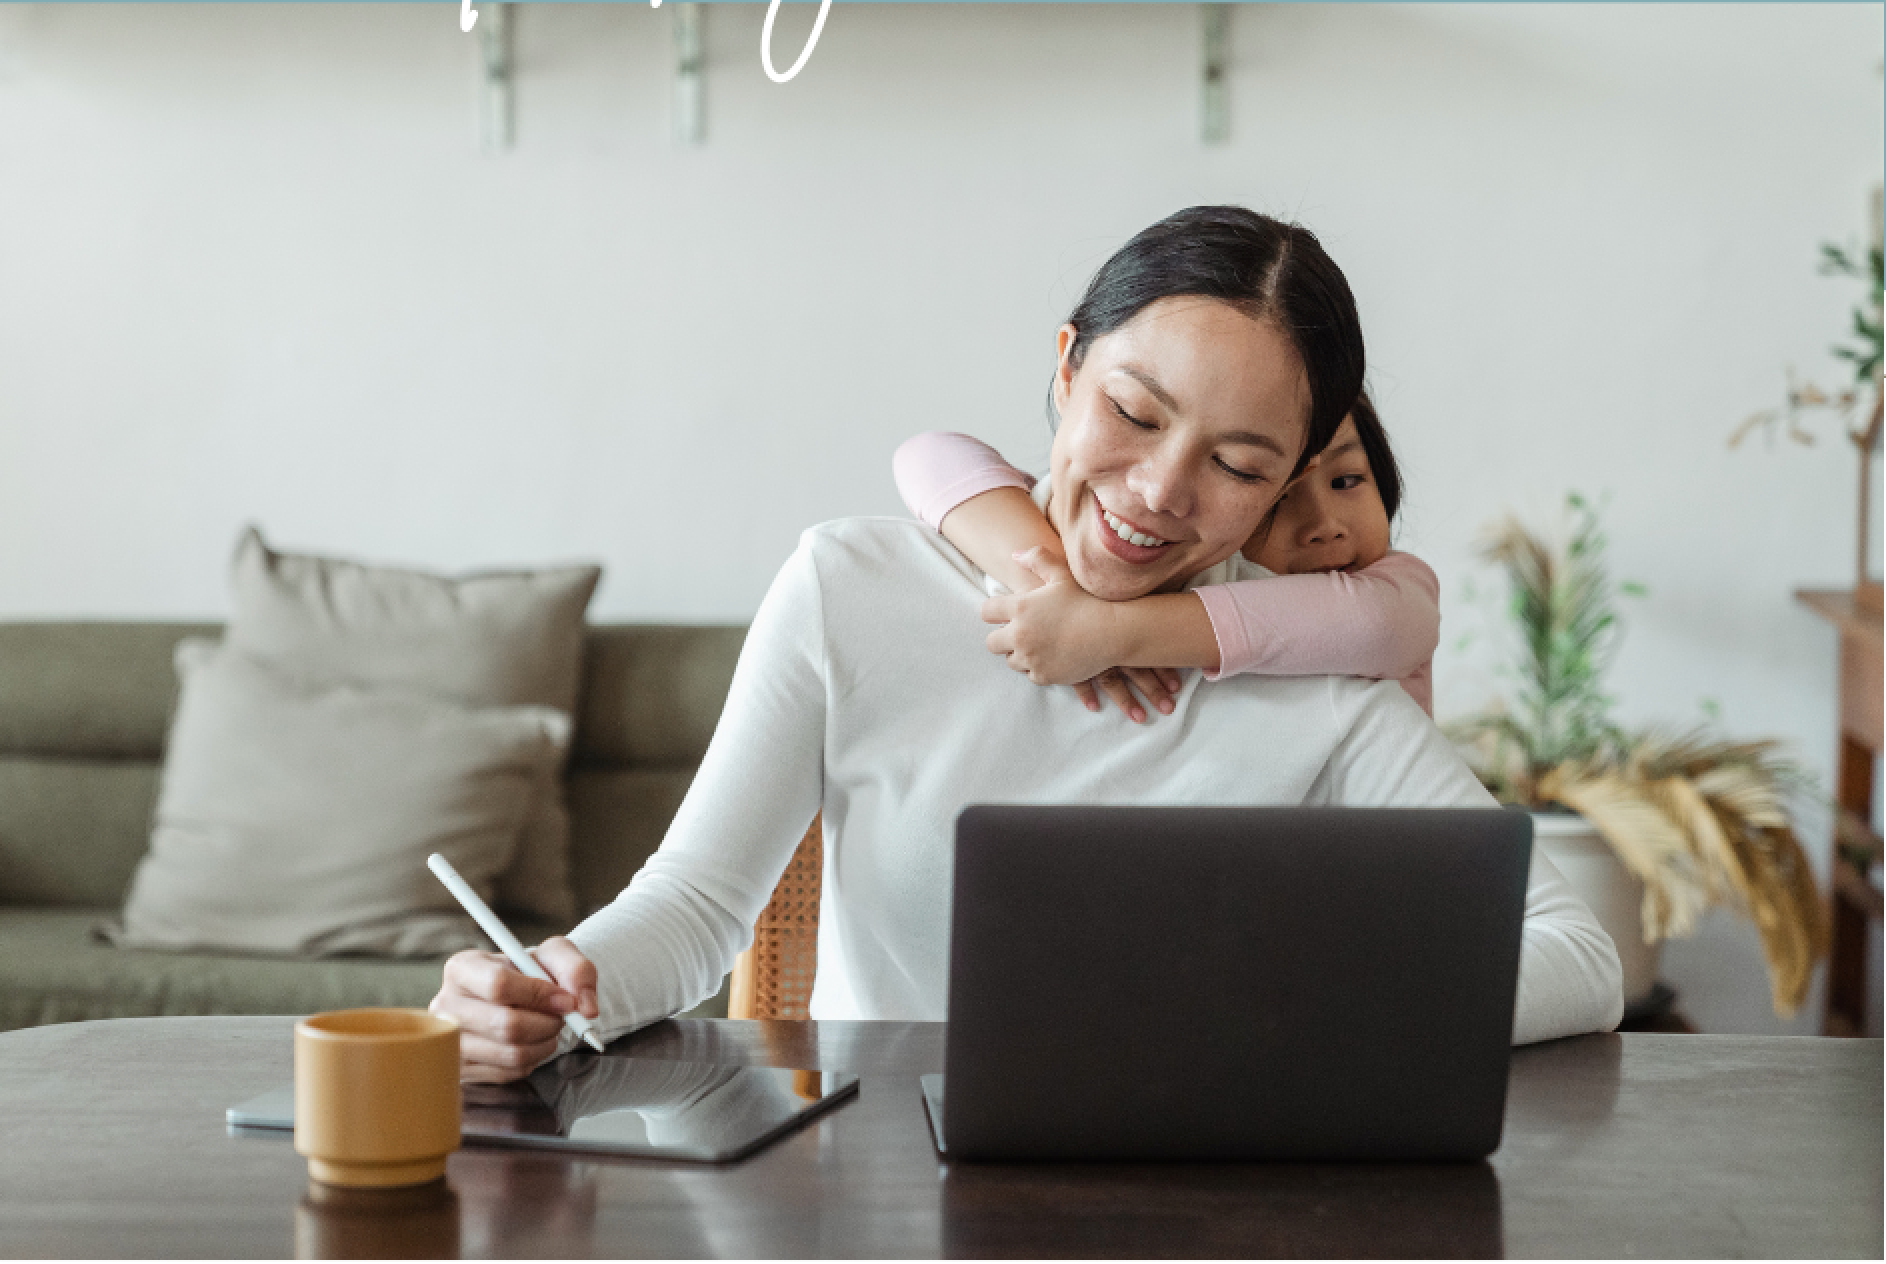 5 Ways to Overcome Challenges as a Working Mom